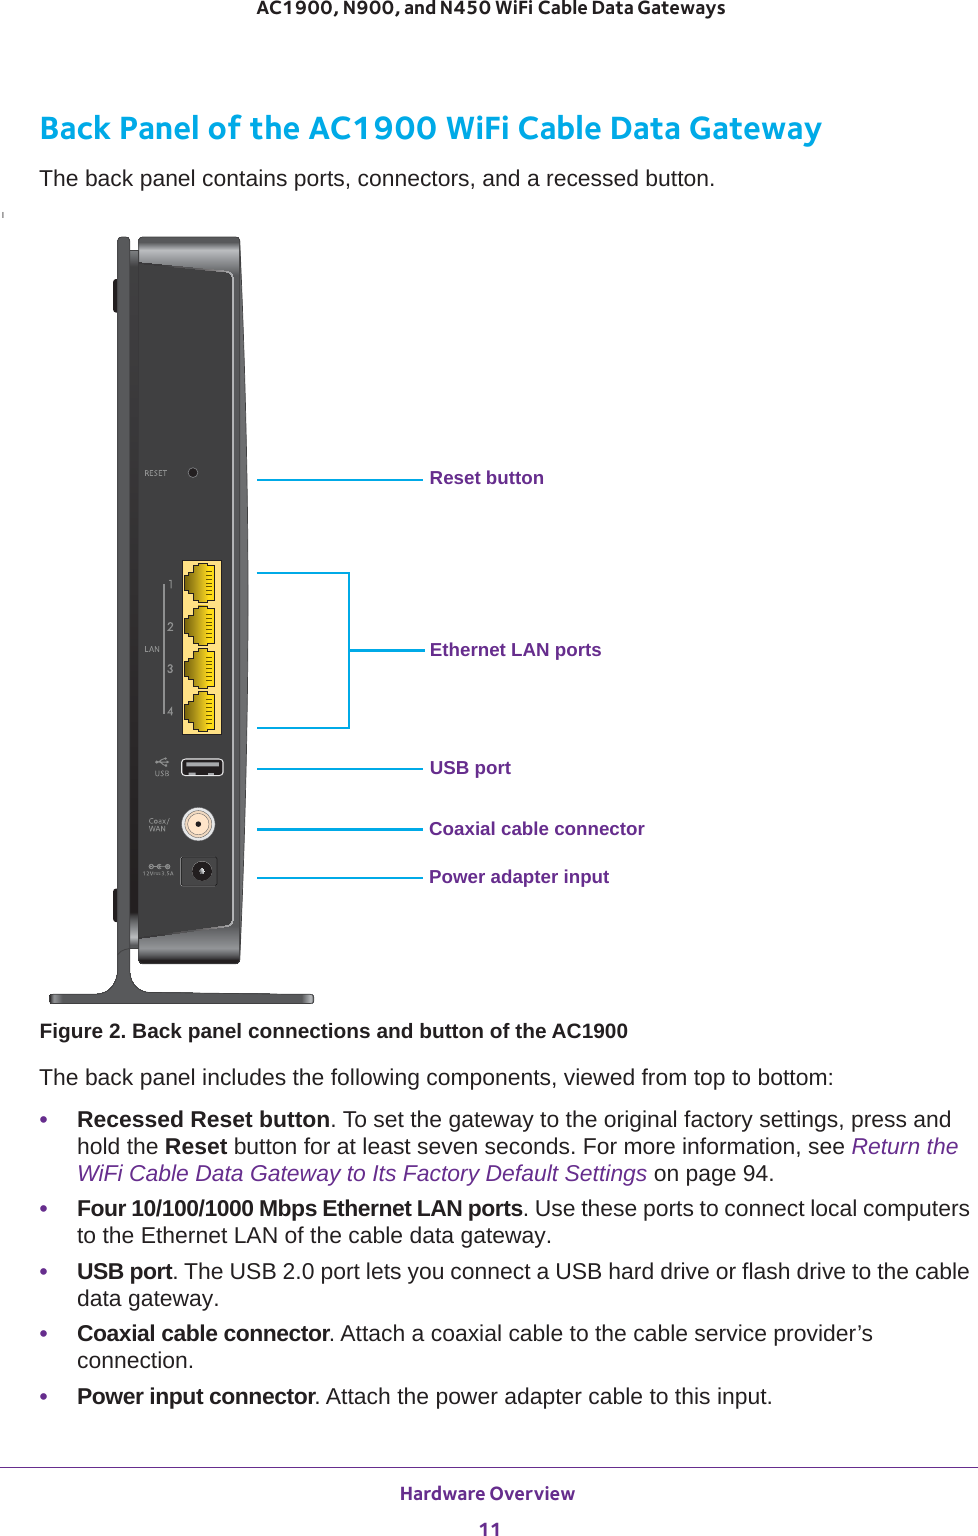 Hardware Overview 11 AC1900, N900, and N450 WiFi Cable Data GatewaysBack Panel of the AC1900 WiFi Cable Data GatewayThe back panel contains ports, connectors, and a recessed button.lPower adapter inputEthernet LAN portsCoaxial cable connectorReset buttonUSB portFigure 2. Back panel connections and button of the AC1900The back panel includes the following components, viewed from top to bottom:•Recessed Reset button. To set the gateway to the original factory settings, press and hold the Reset button for at least seven seconds. For more information, see Return the WiFi Cable Data Gateway to Its Factory Default Settings on page  94.•Four 10/100/1000 Mbps Ethernet LAN ports. Use these ports to connect local computers to the Ethernet LAN of the cable data gateway.•USB port. The USB 2.0 port lets you connect a USB hard drive or flash drive to the cable data gateway.•Coaxial cable connector. Attach a coaxial cable to the cable service provider’s connection.•Power input connector. Attach the power adapter cable to this input.